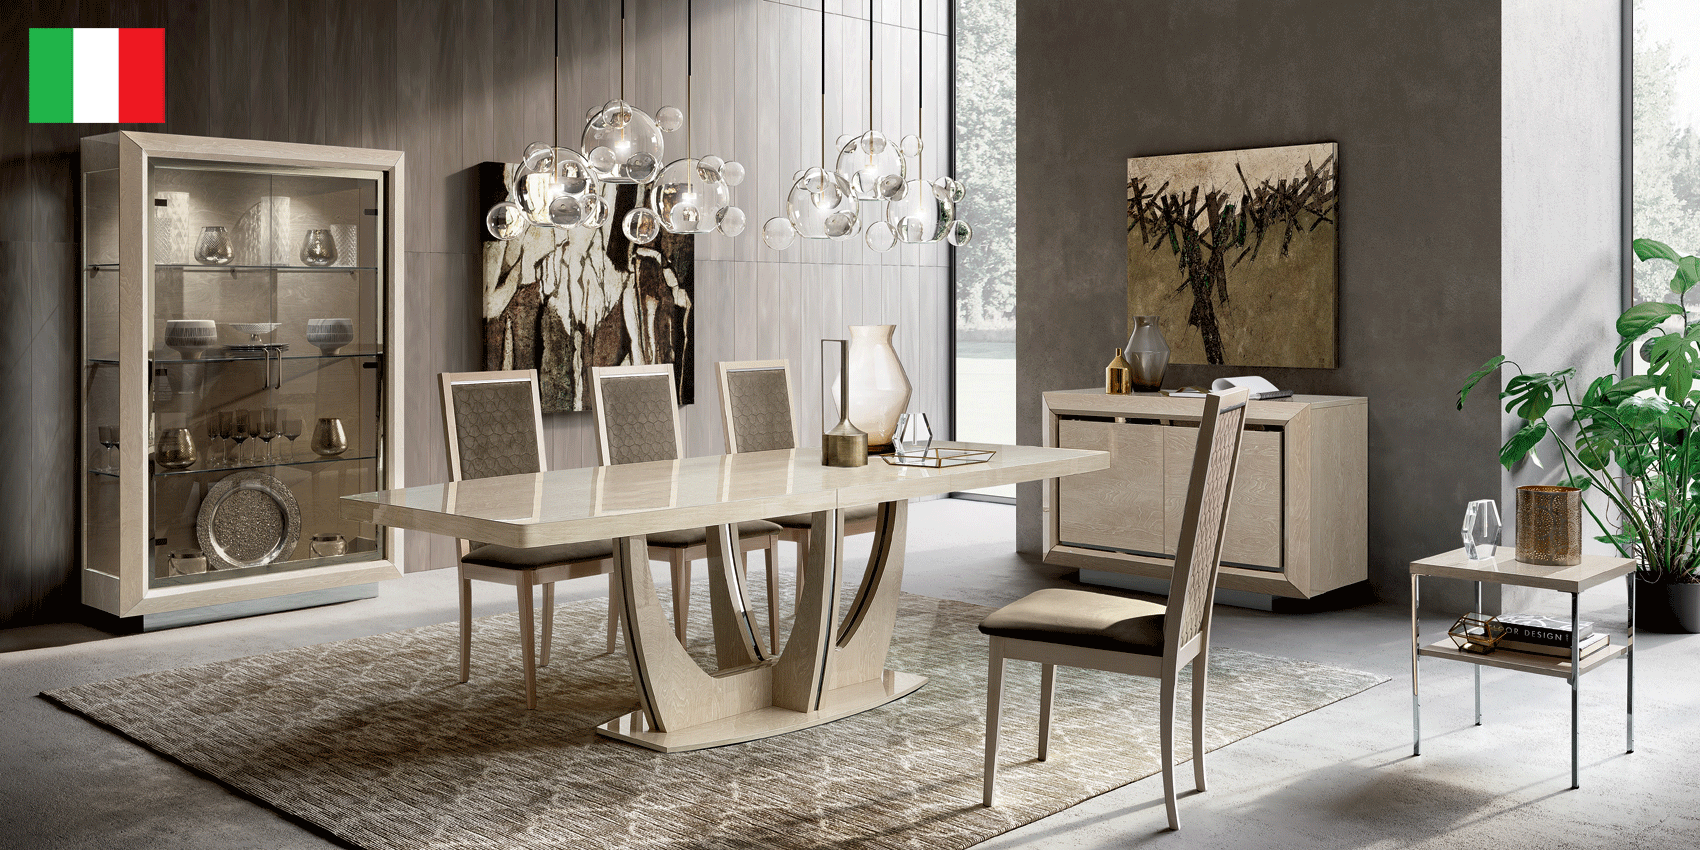 Dining Room Furniture Classic Dining Room Sets Elite Dining Ivory with Ambra “Rombi” Chairs